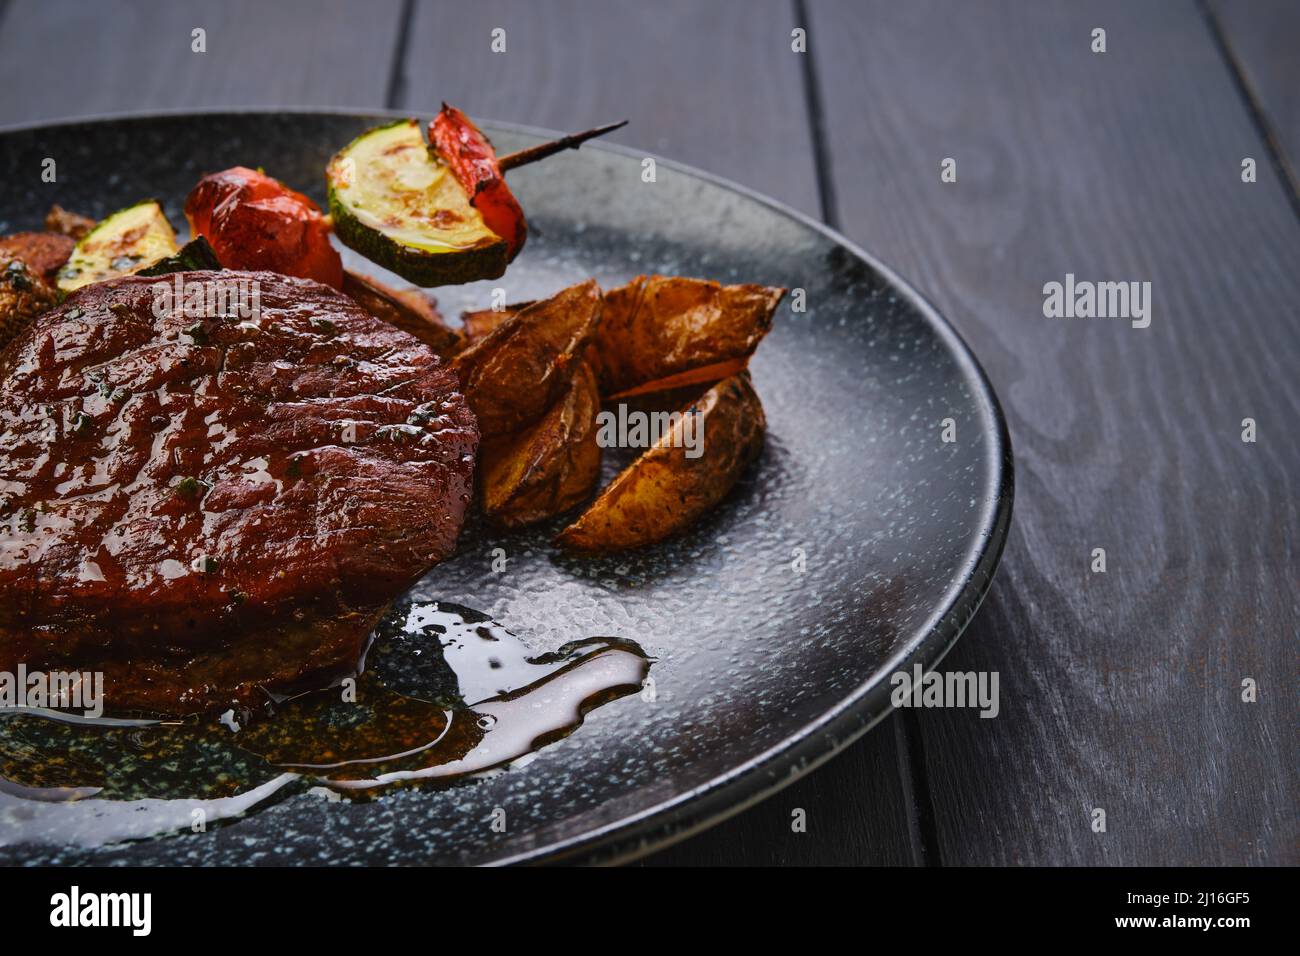 Closeup view of juicy beef steak with potato wedges and grilled vegetables on skewer Stock Photo